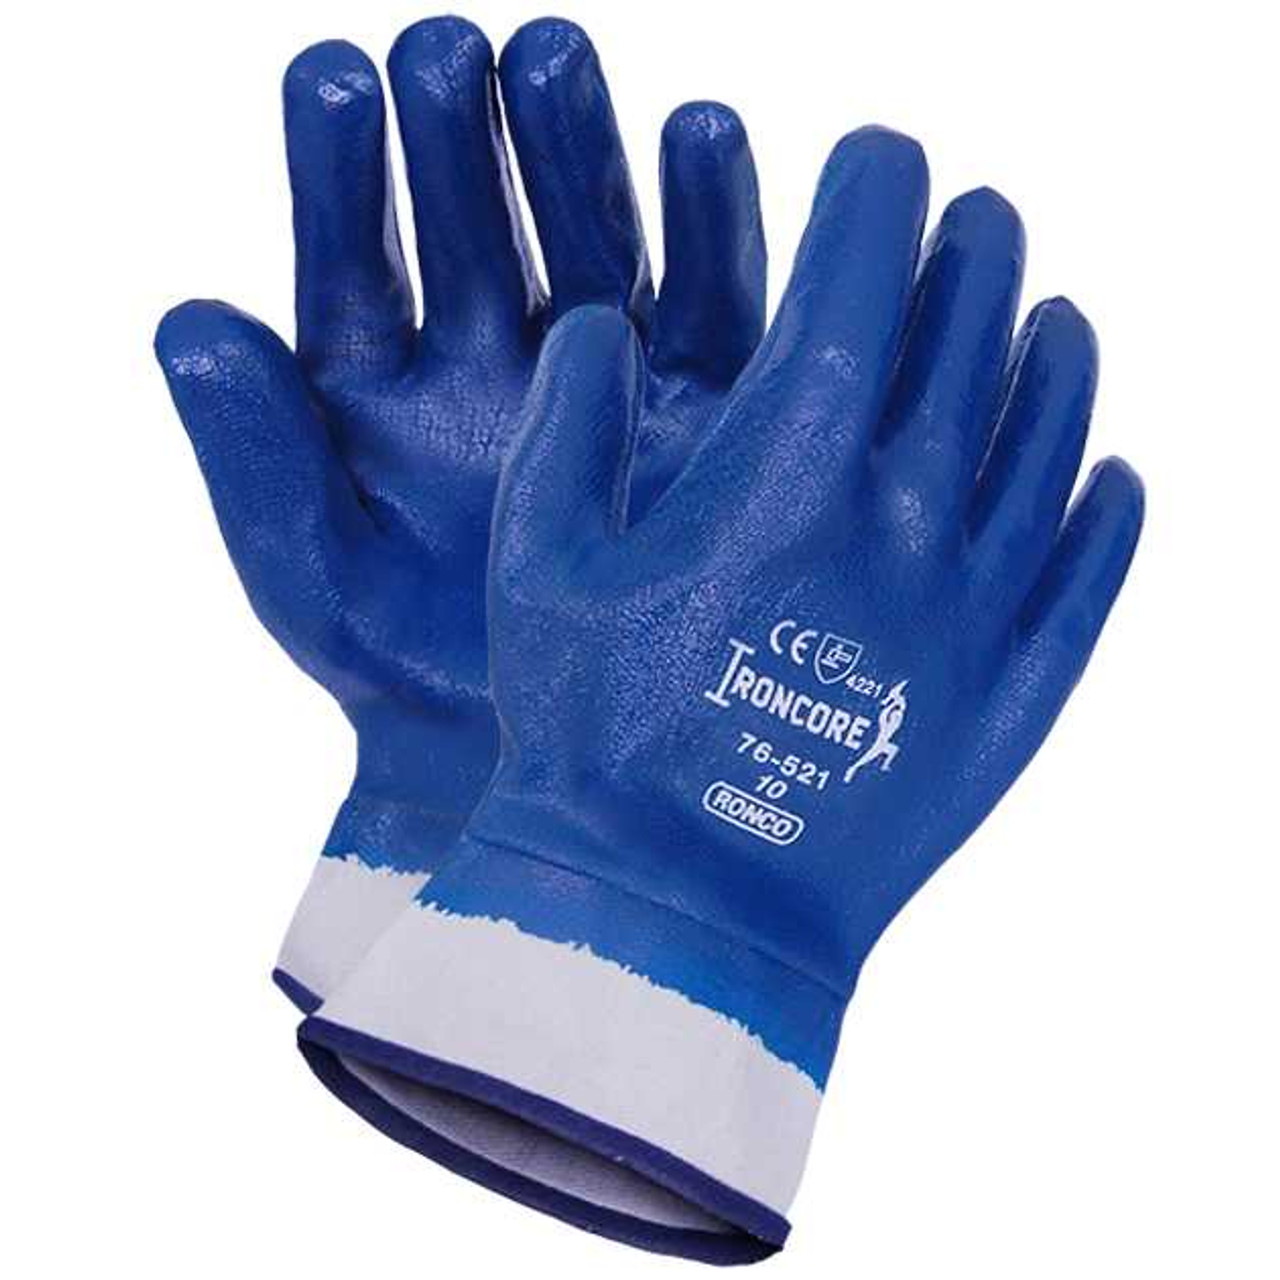 IronCore™ Nitrile Coated Glove (72 pairs / case)